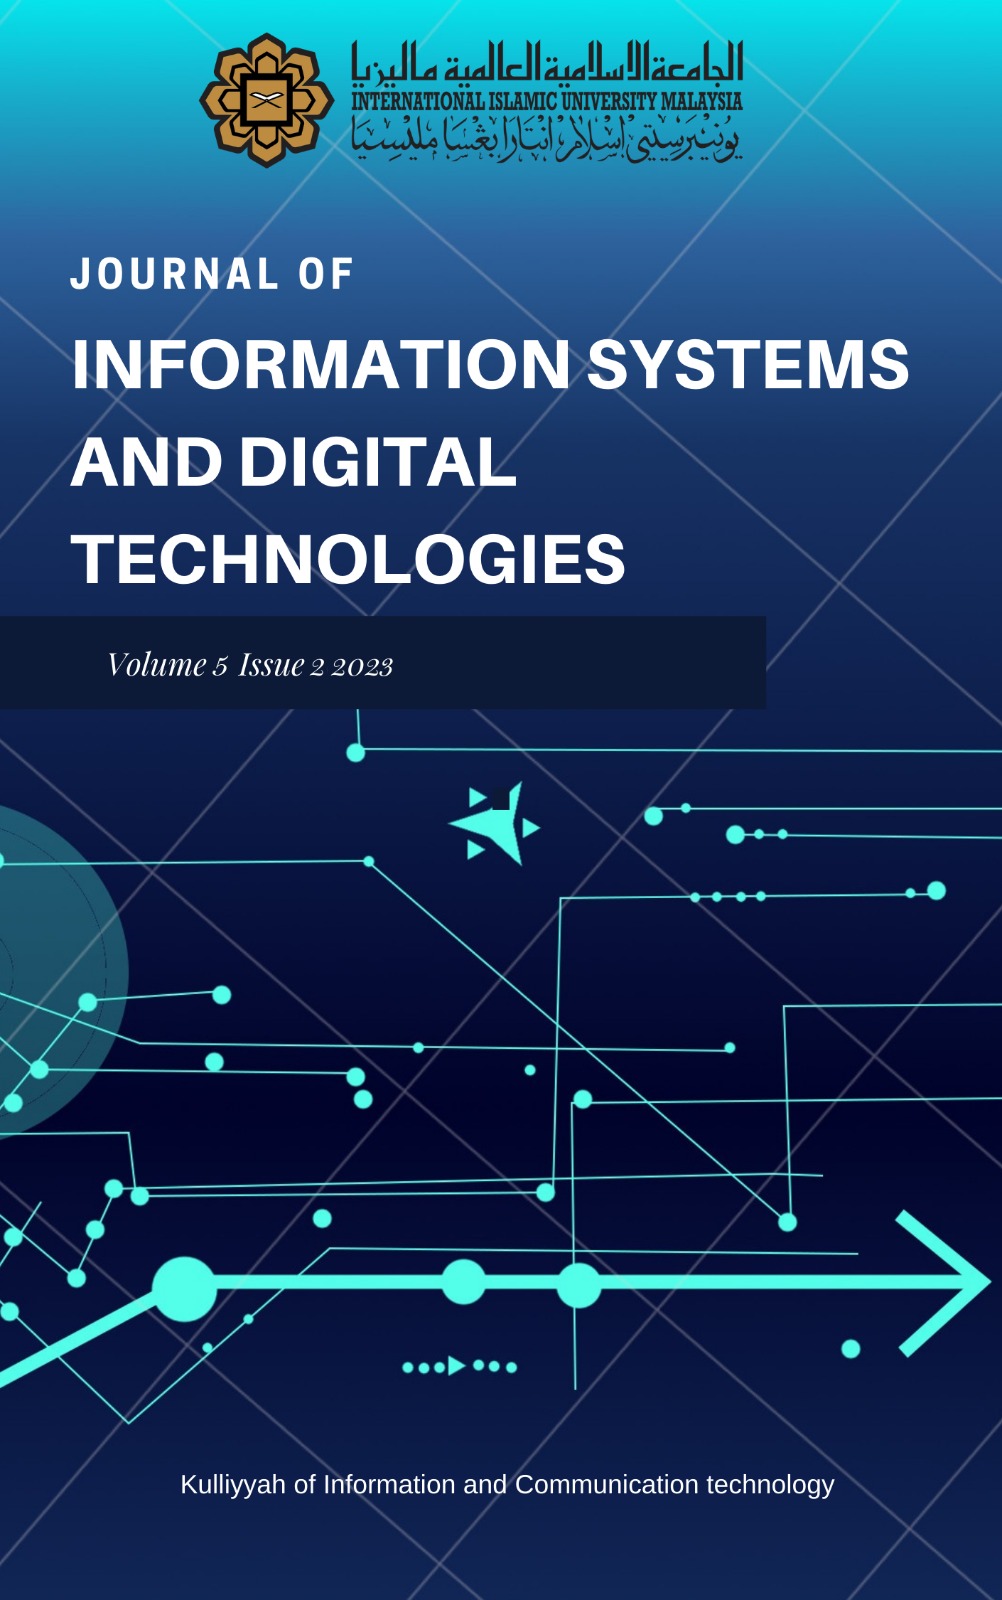 					View Vol. 5 No. 2 (2023): Journal of Information Systems and Digital Technologies
				